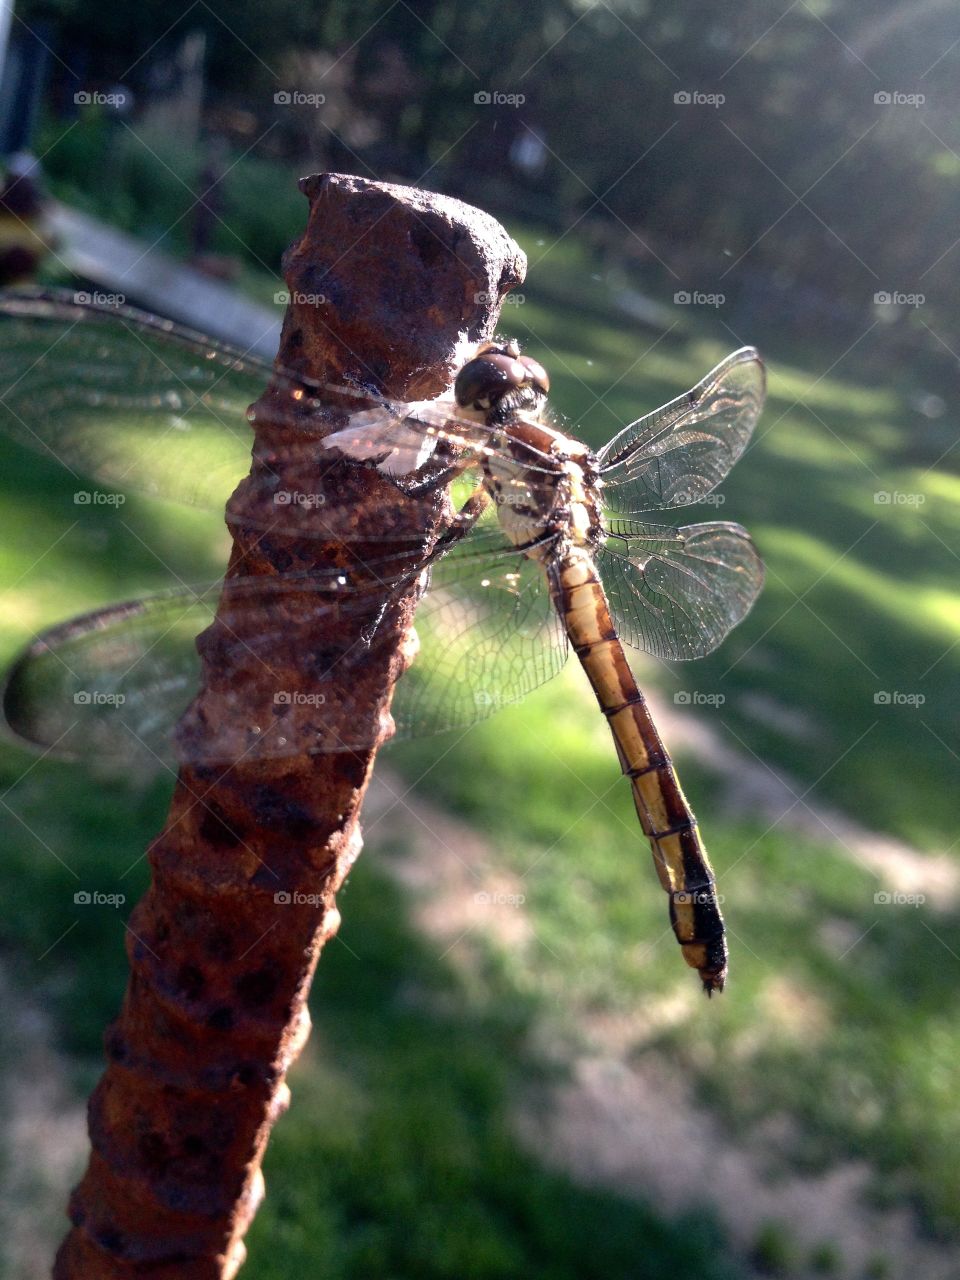 Golden Hour Mission. Last light of day shining on a Golden Dragonfly, eating the last of a white winged moth. IPhone pic used.